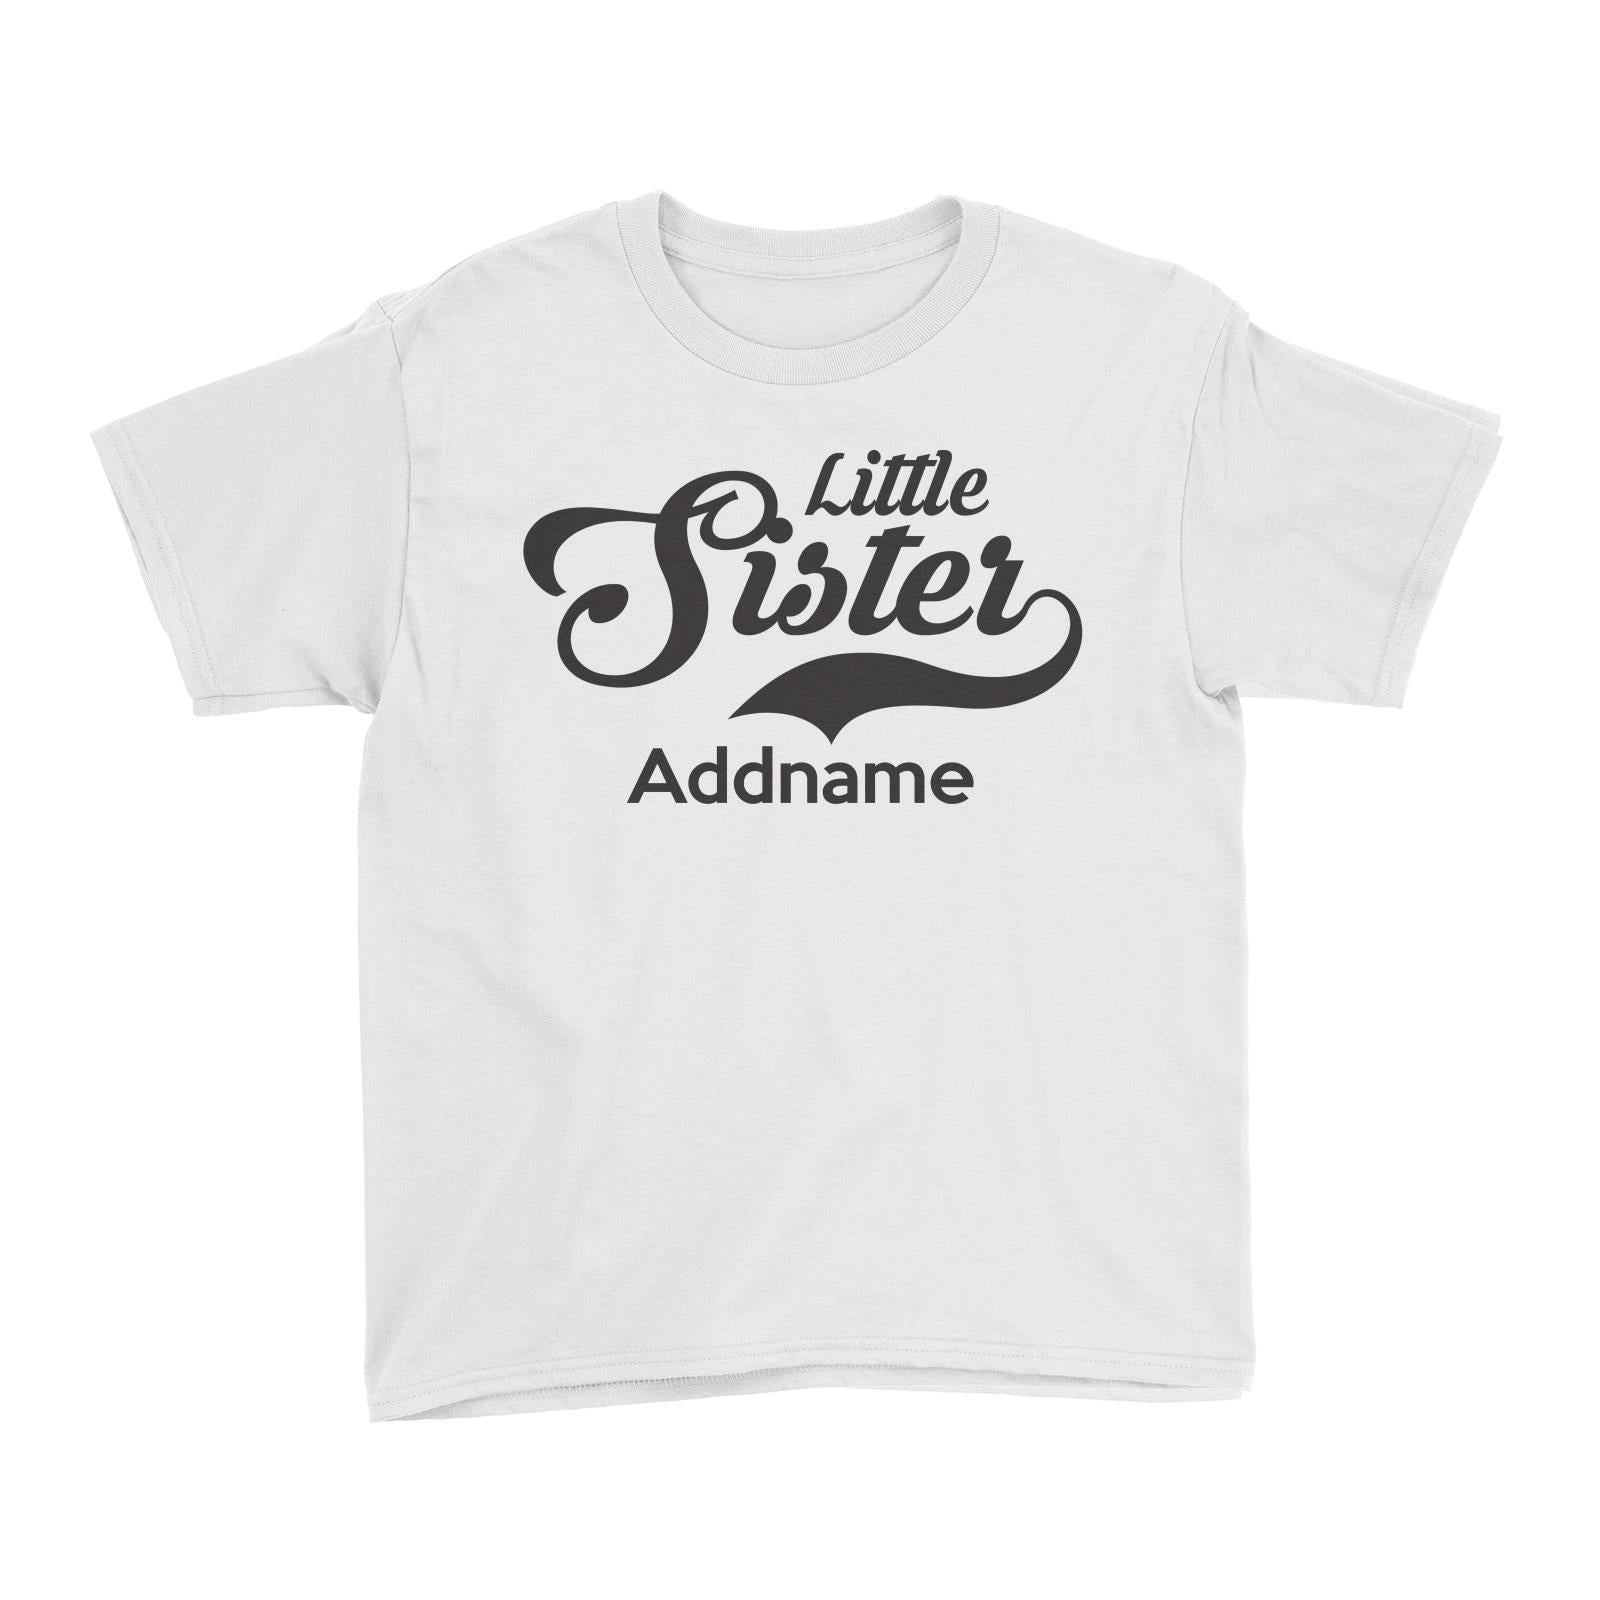 Retro Little Sister Addname Kid's T-Shirt  Matching Family Personalizable Designs